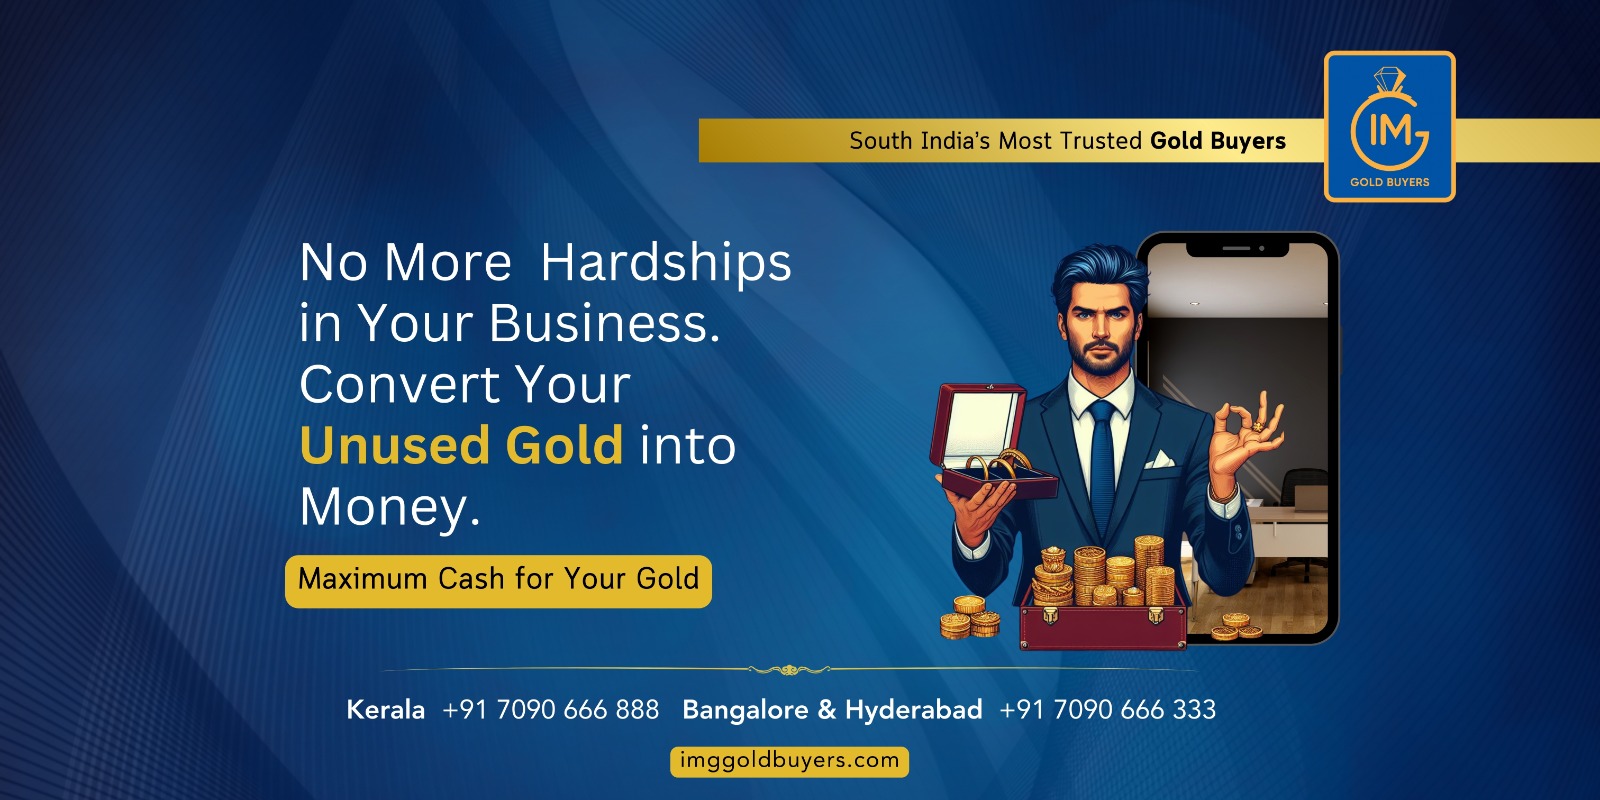 gold buyers in bangalore; top gold buying company in bangalore; best gold buyer in bangalore; best gold buying company in bangalore; best gold buyers in bangalore; pleadged gold buyers in bangalore; gold buying company in bangalore; sell gold for cash in bangalore; jewelary buyers; gold buyers; gold buyer; online gold buyers; pledged old buyers old gold buyers; sell gold for cash; sell my gold; cash for gold; sell gold; gold selling; selling gold; gold sale;